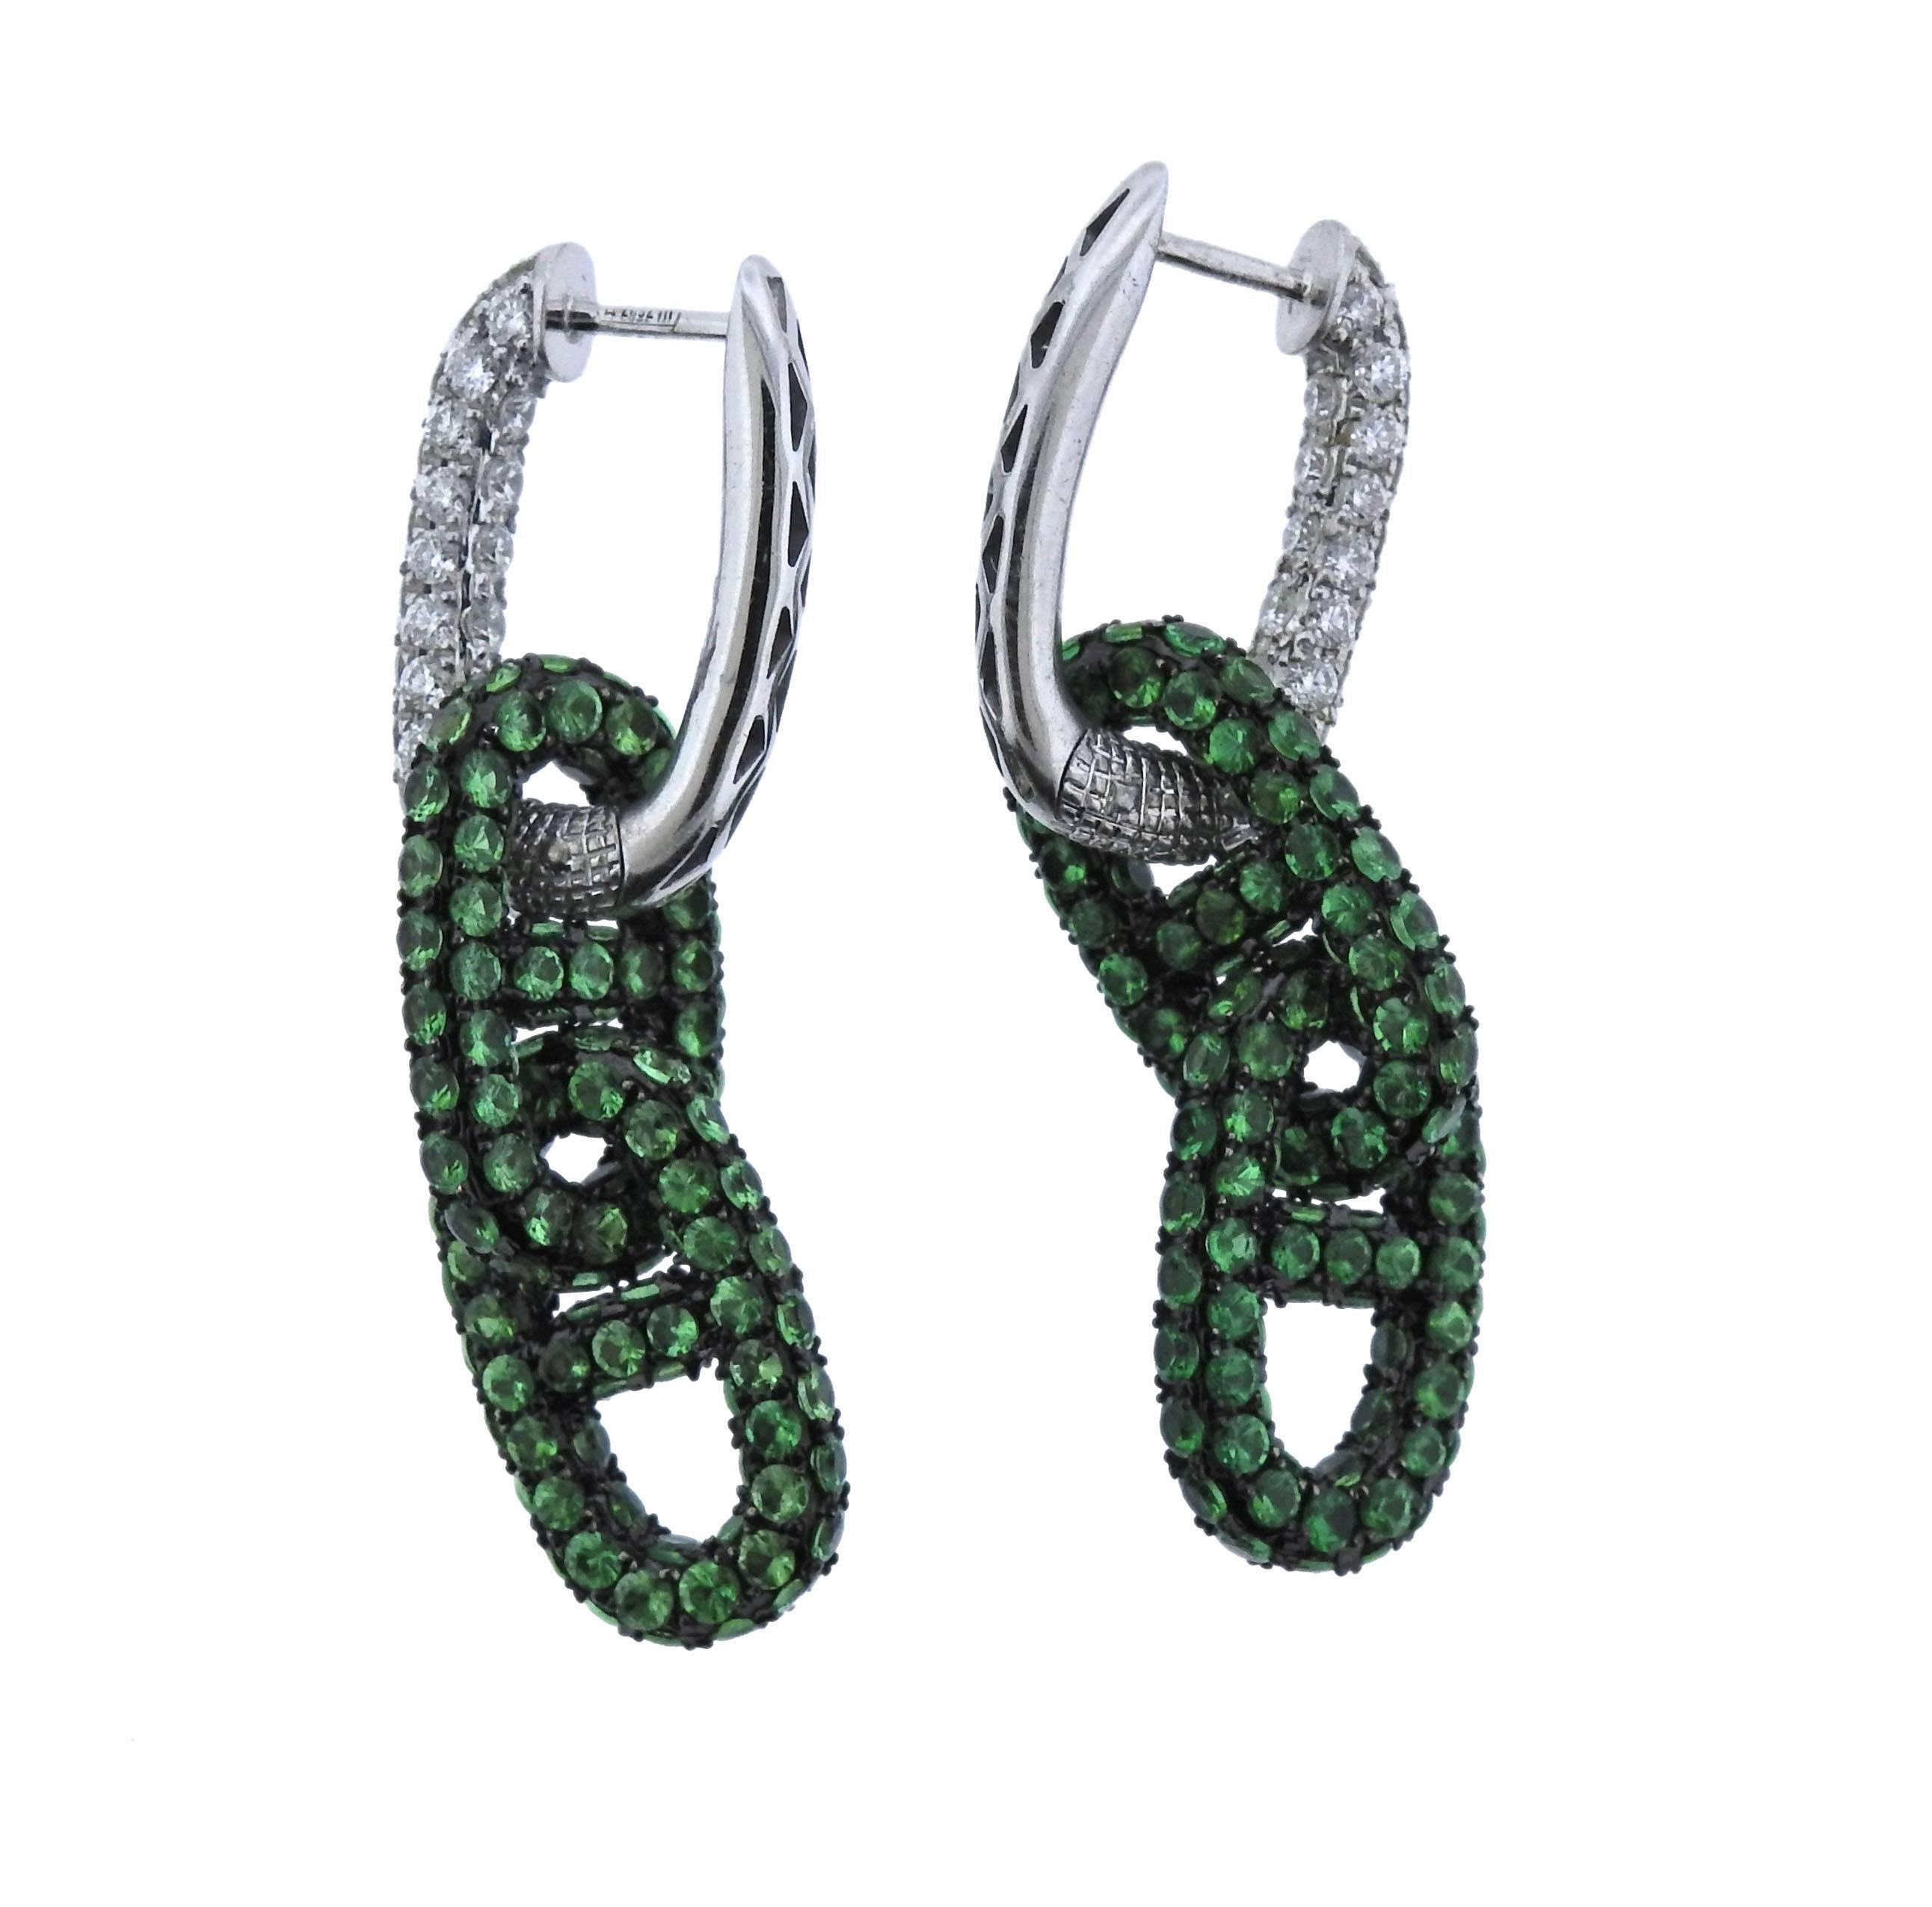  Pair of 18k white gold day & night link earrings, crafted by Salavetti, featuring removable tsavorite garnet drops and top hoops set with approx. 1.78ctw in G/VS diamonds. Earrings can be worn with tsavorite drops, or without.  With drops - 47mm